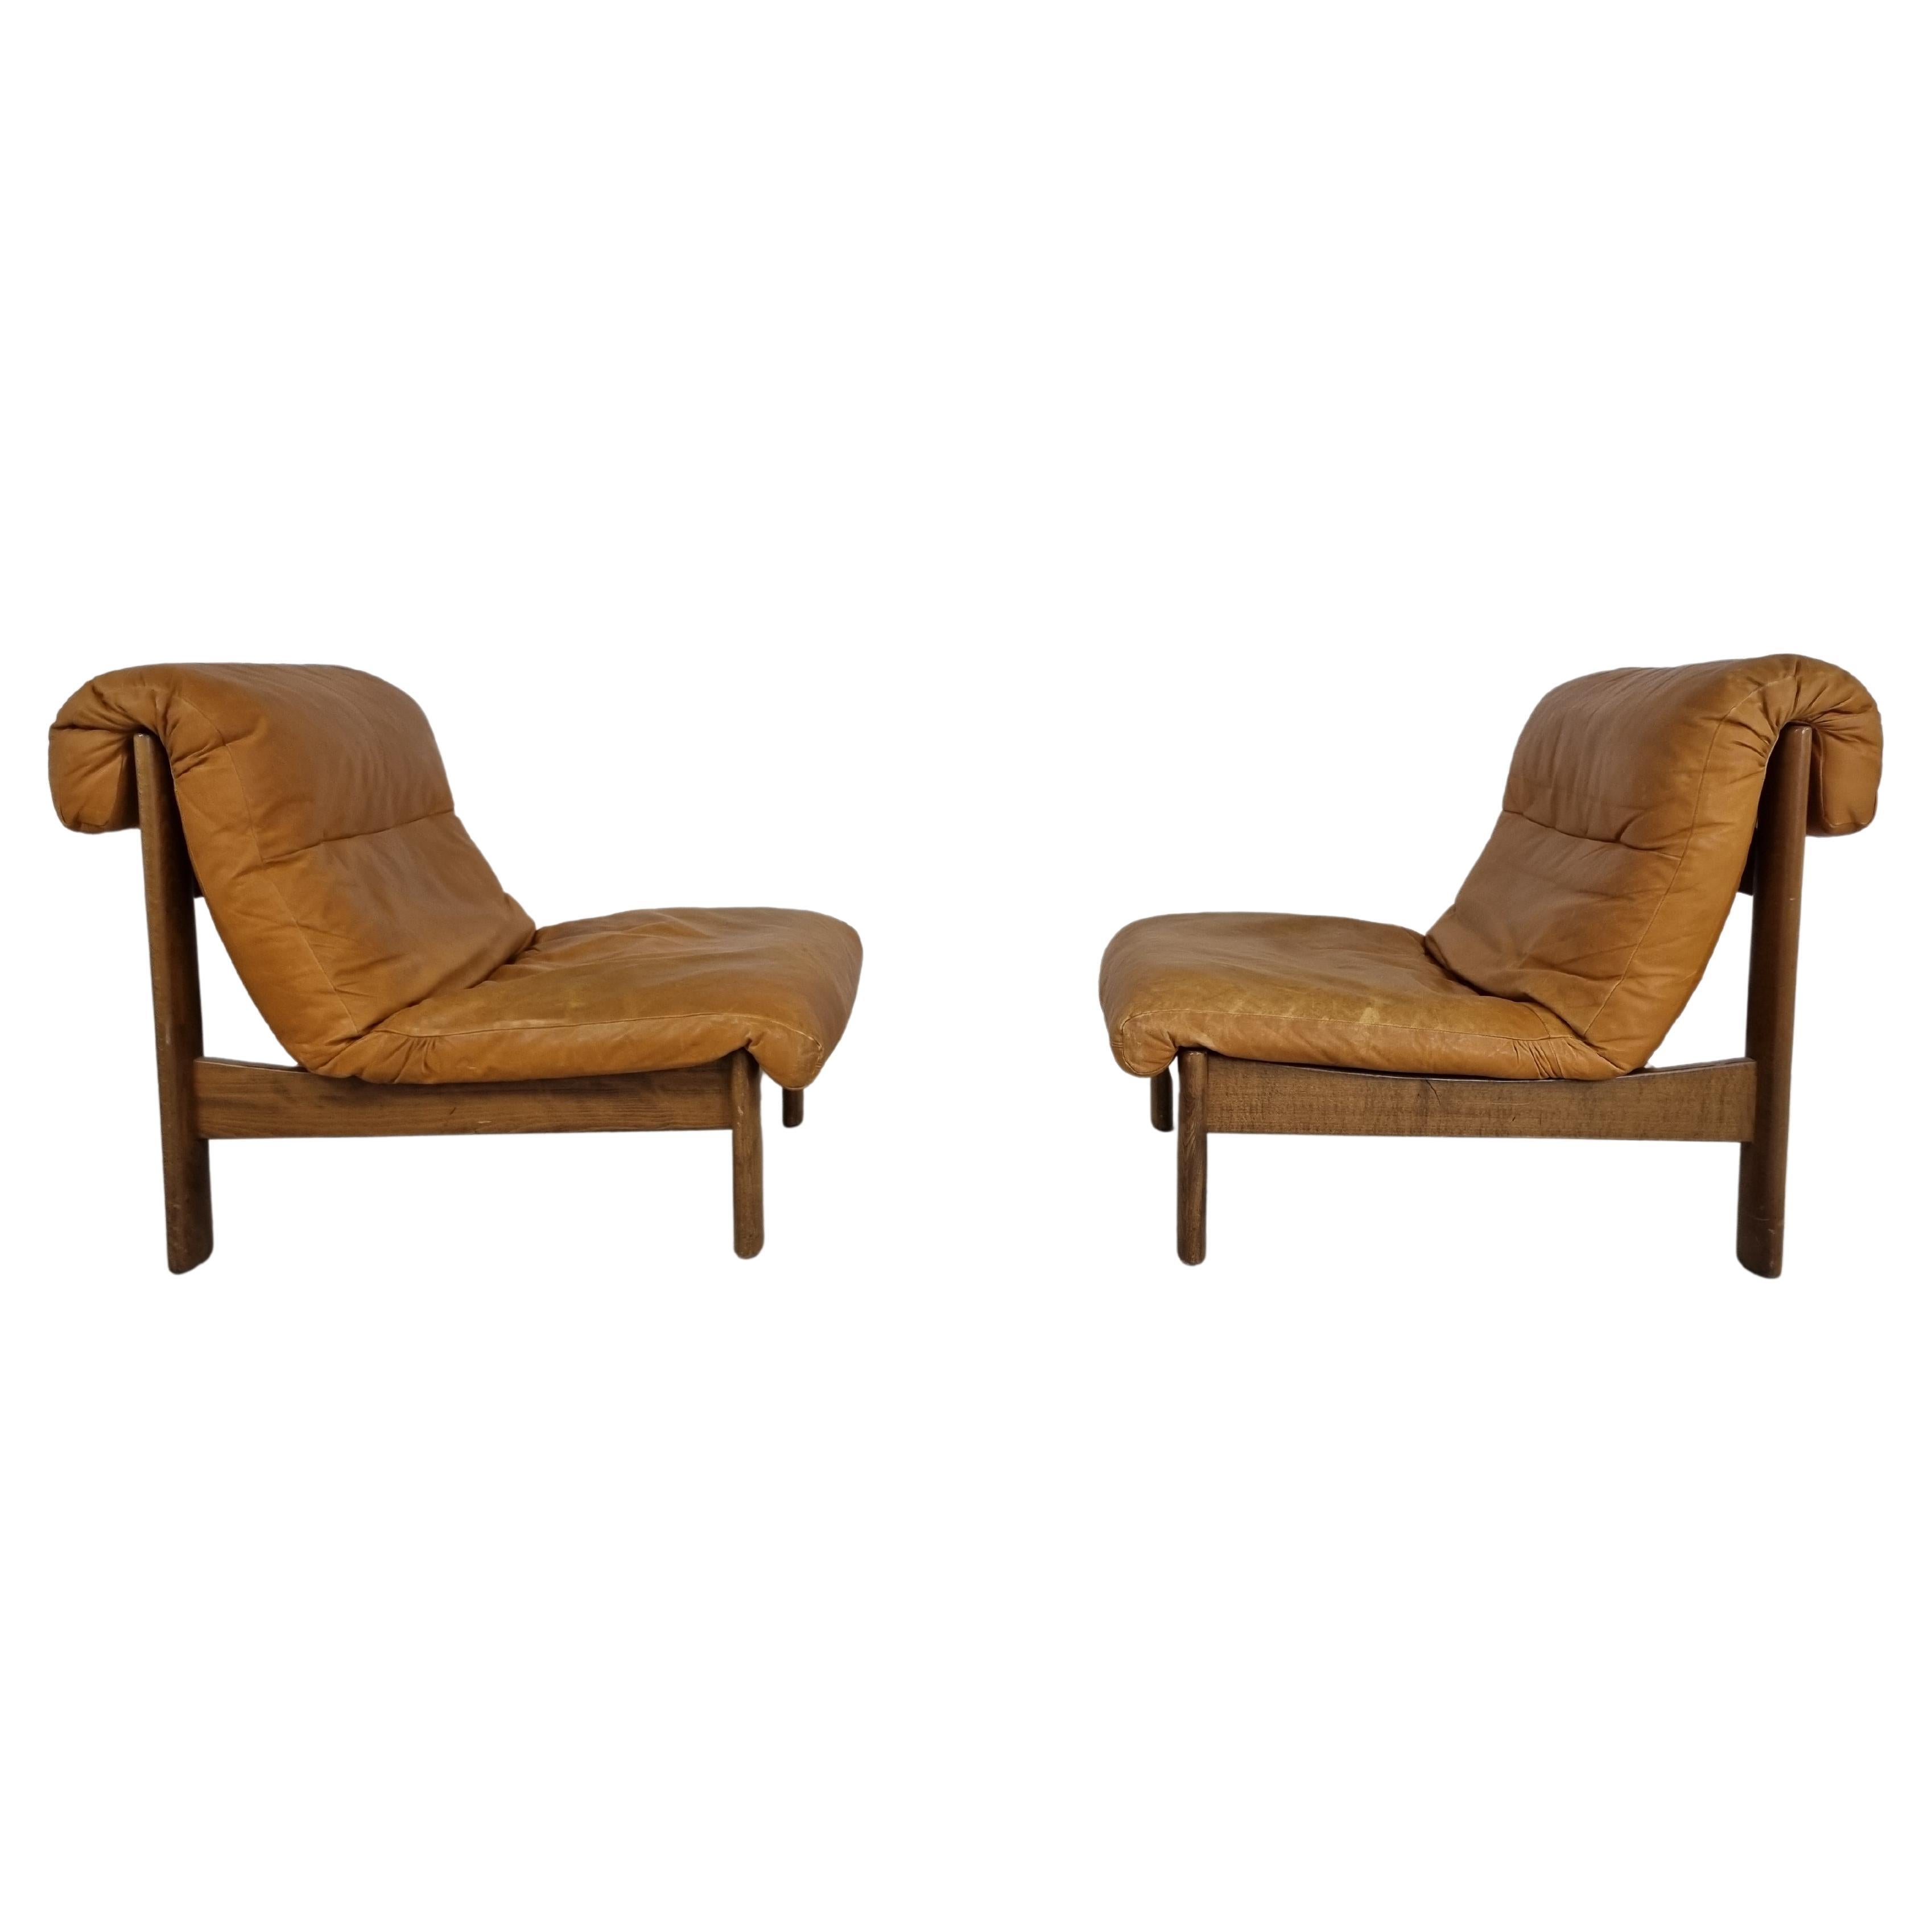 Vintage Leather Lounge Chairs, 1970s Set of 2